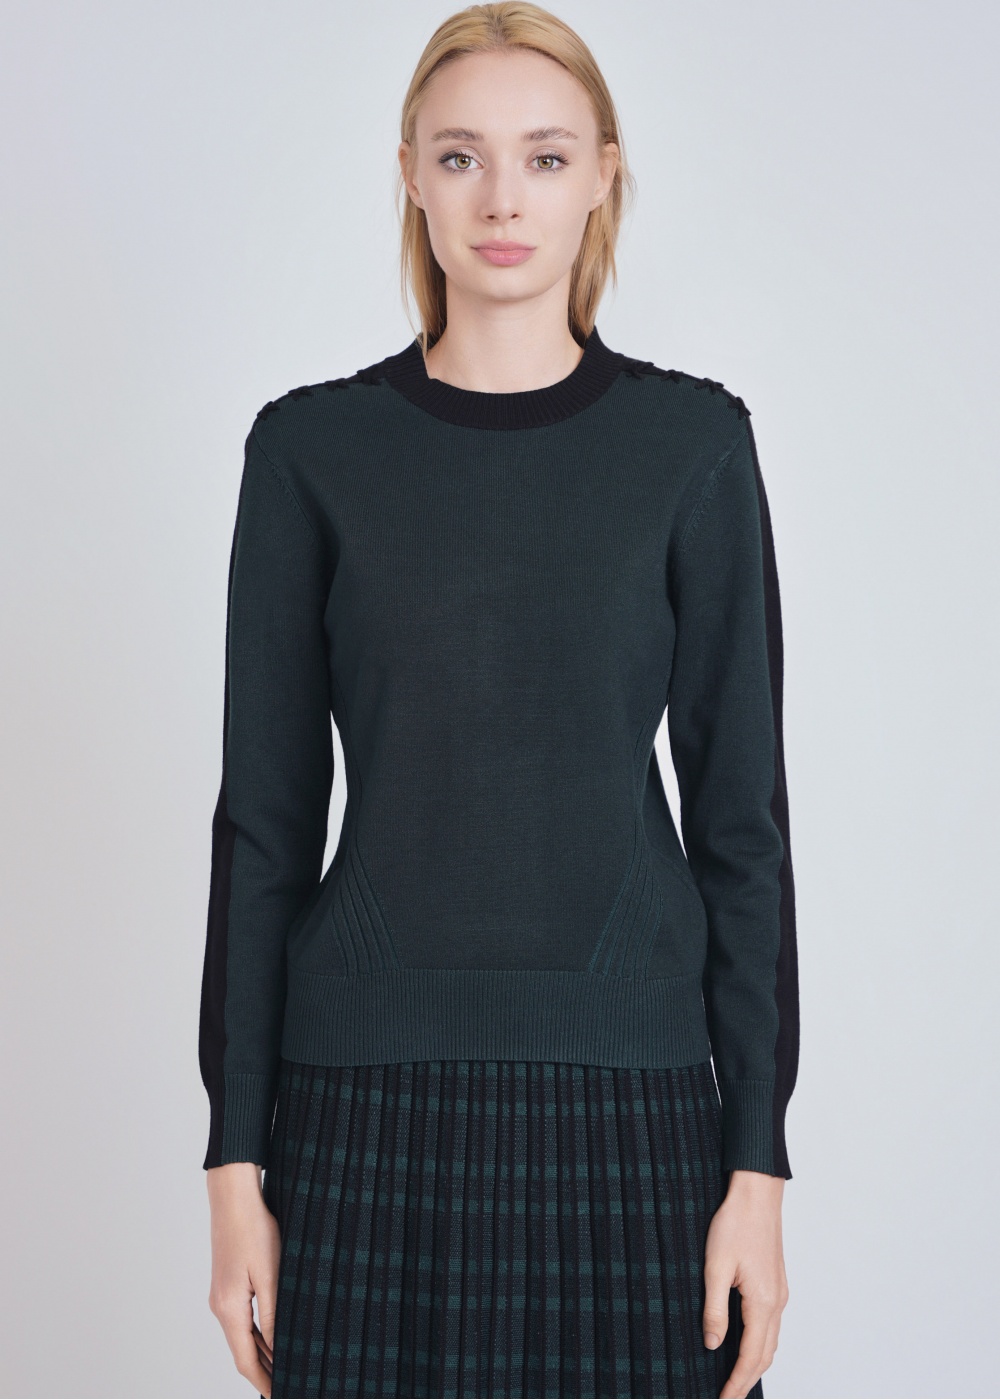 Nature's Embrace: Green Sweater with Black Sleeve Design